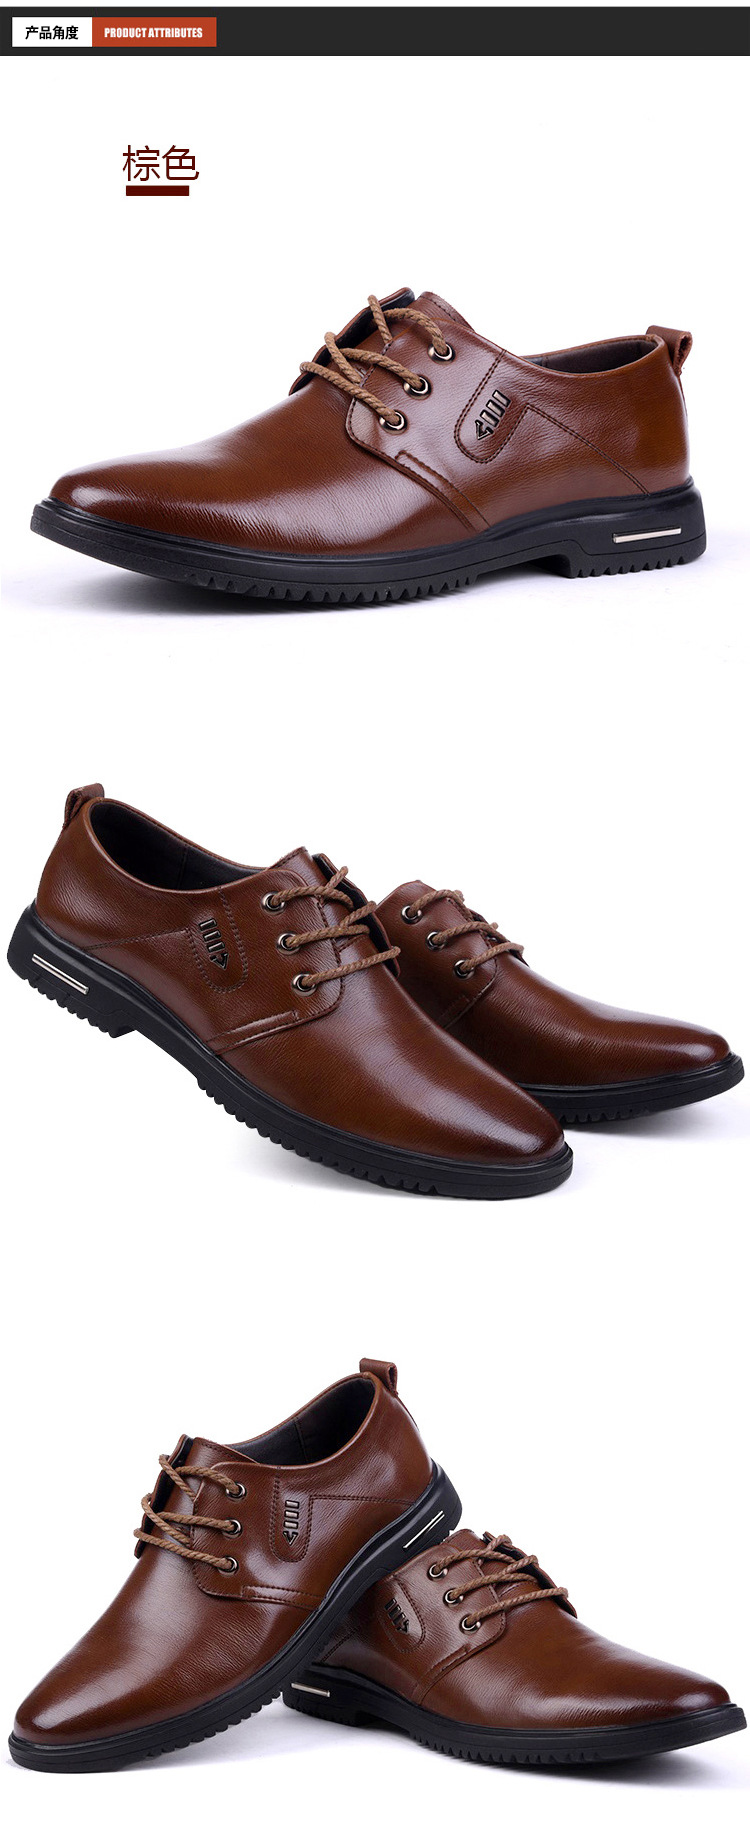 Chaussures homme - Ref 3445663 Image 11